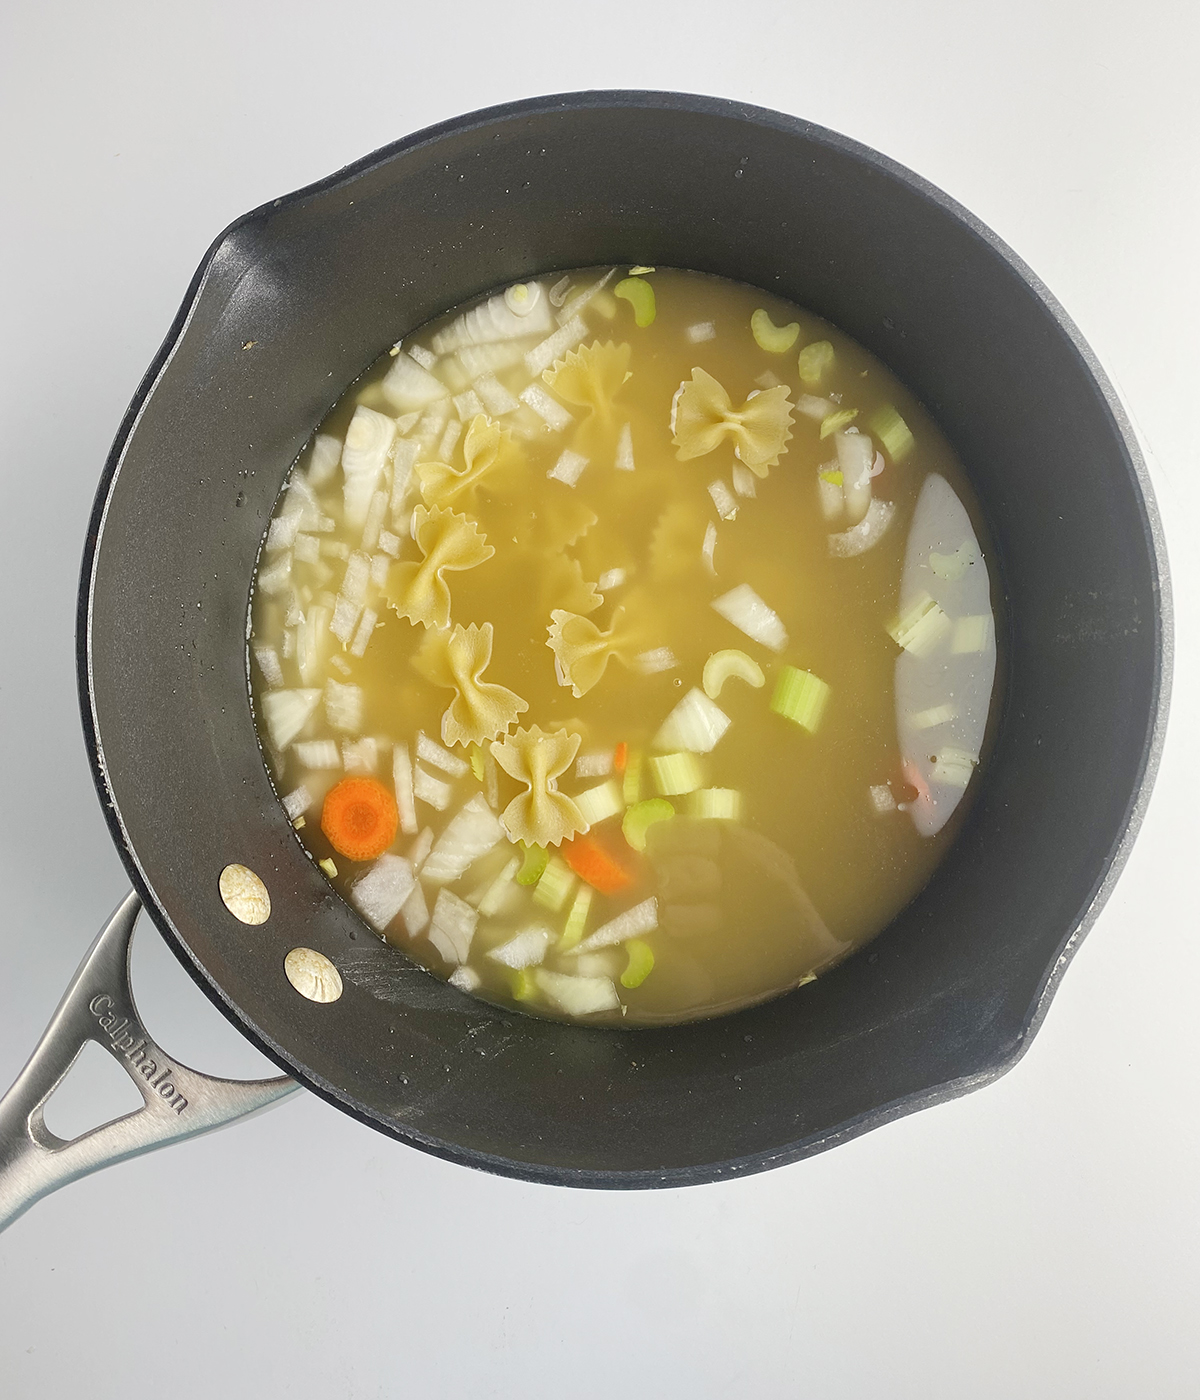 Veggies and broth for easy chicken noodle soup in a pot.